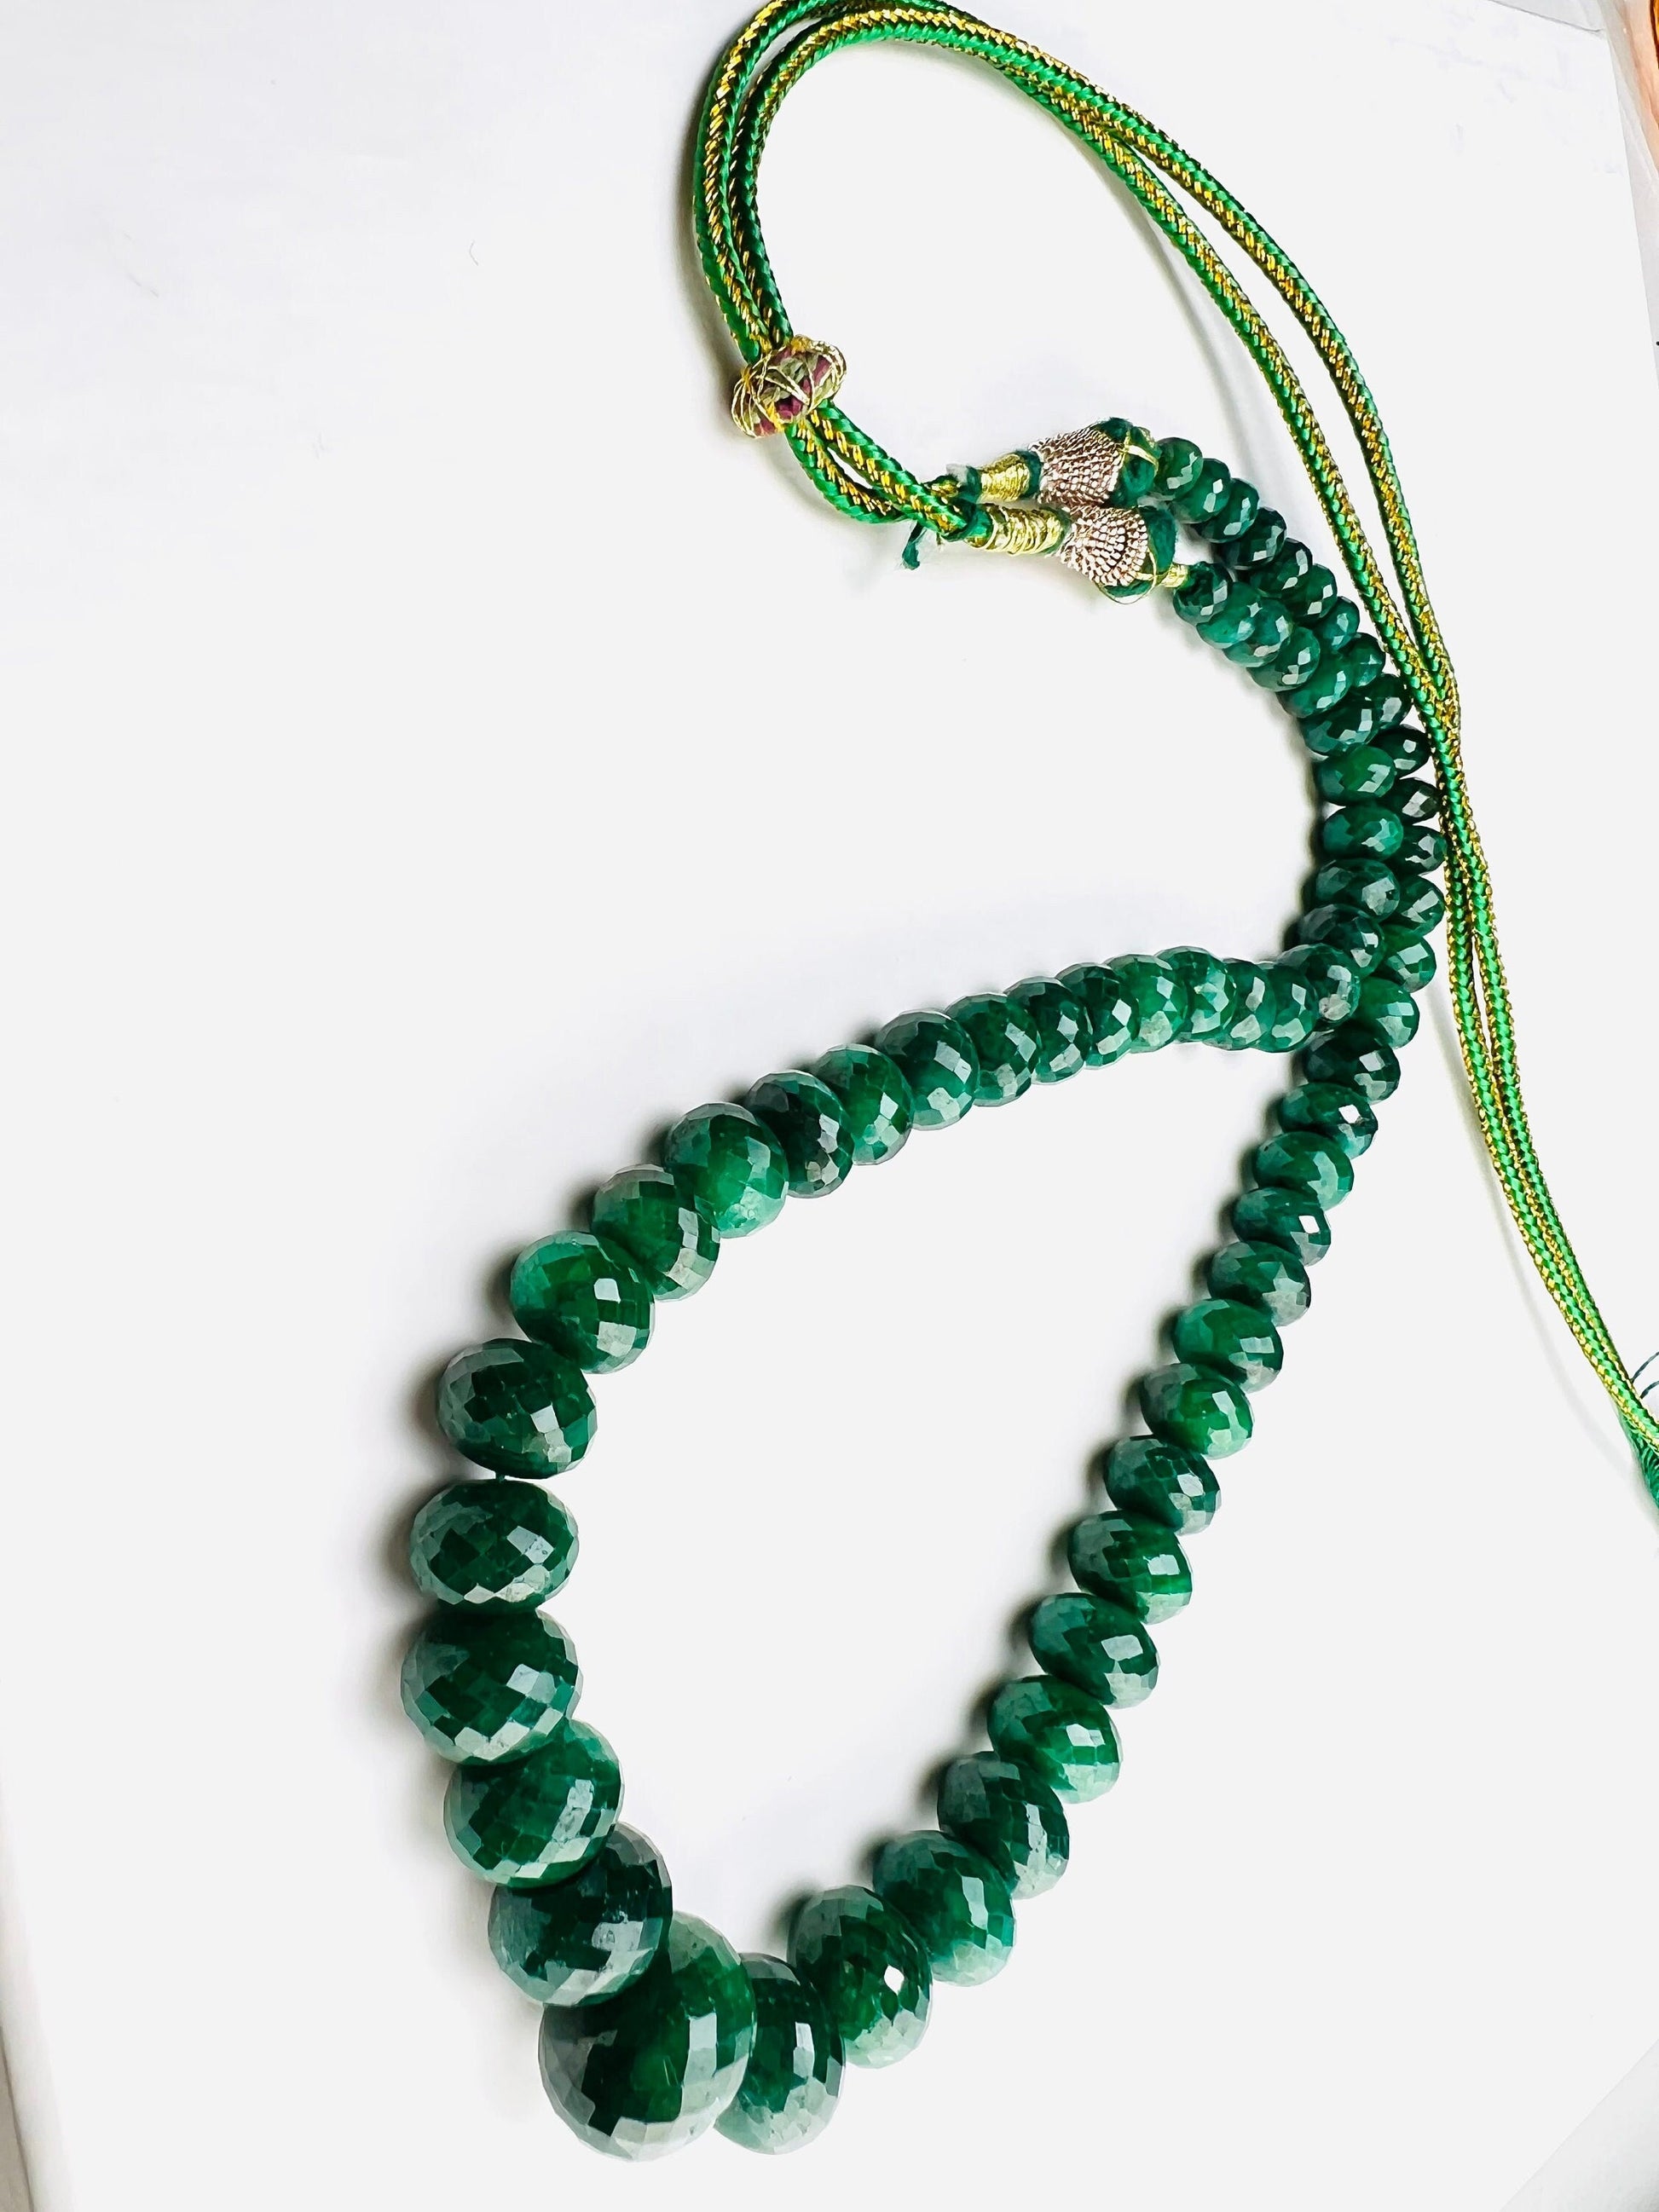 Genuine Zambian Emerald Dark green 7-16mm large Faceted Roundel Gemstone 16&quot; Necklace with 9&quot; Adjustable thread,May Birthstone,Gift 471 ct